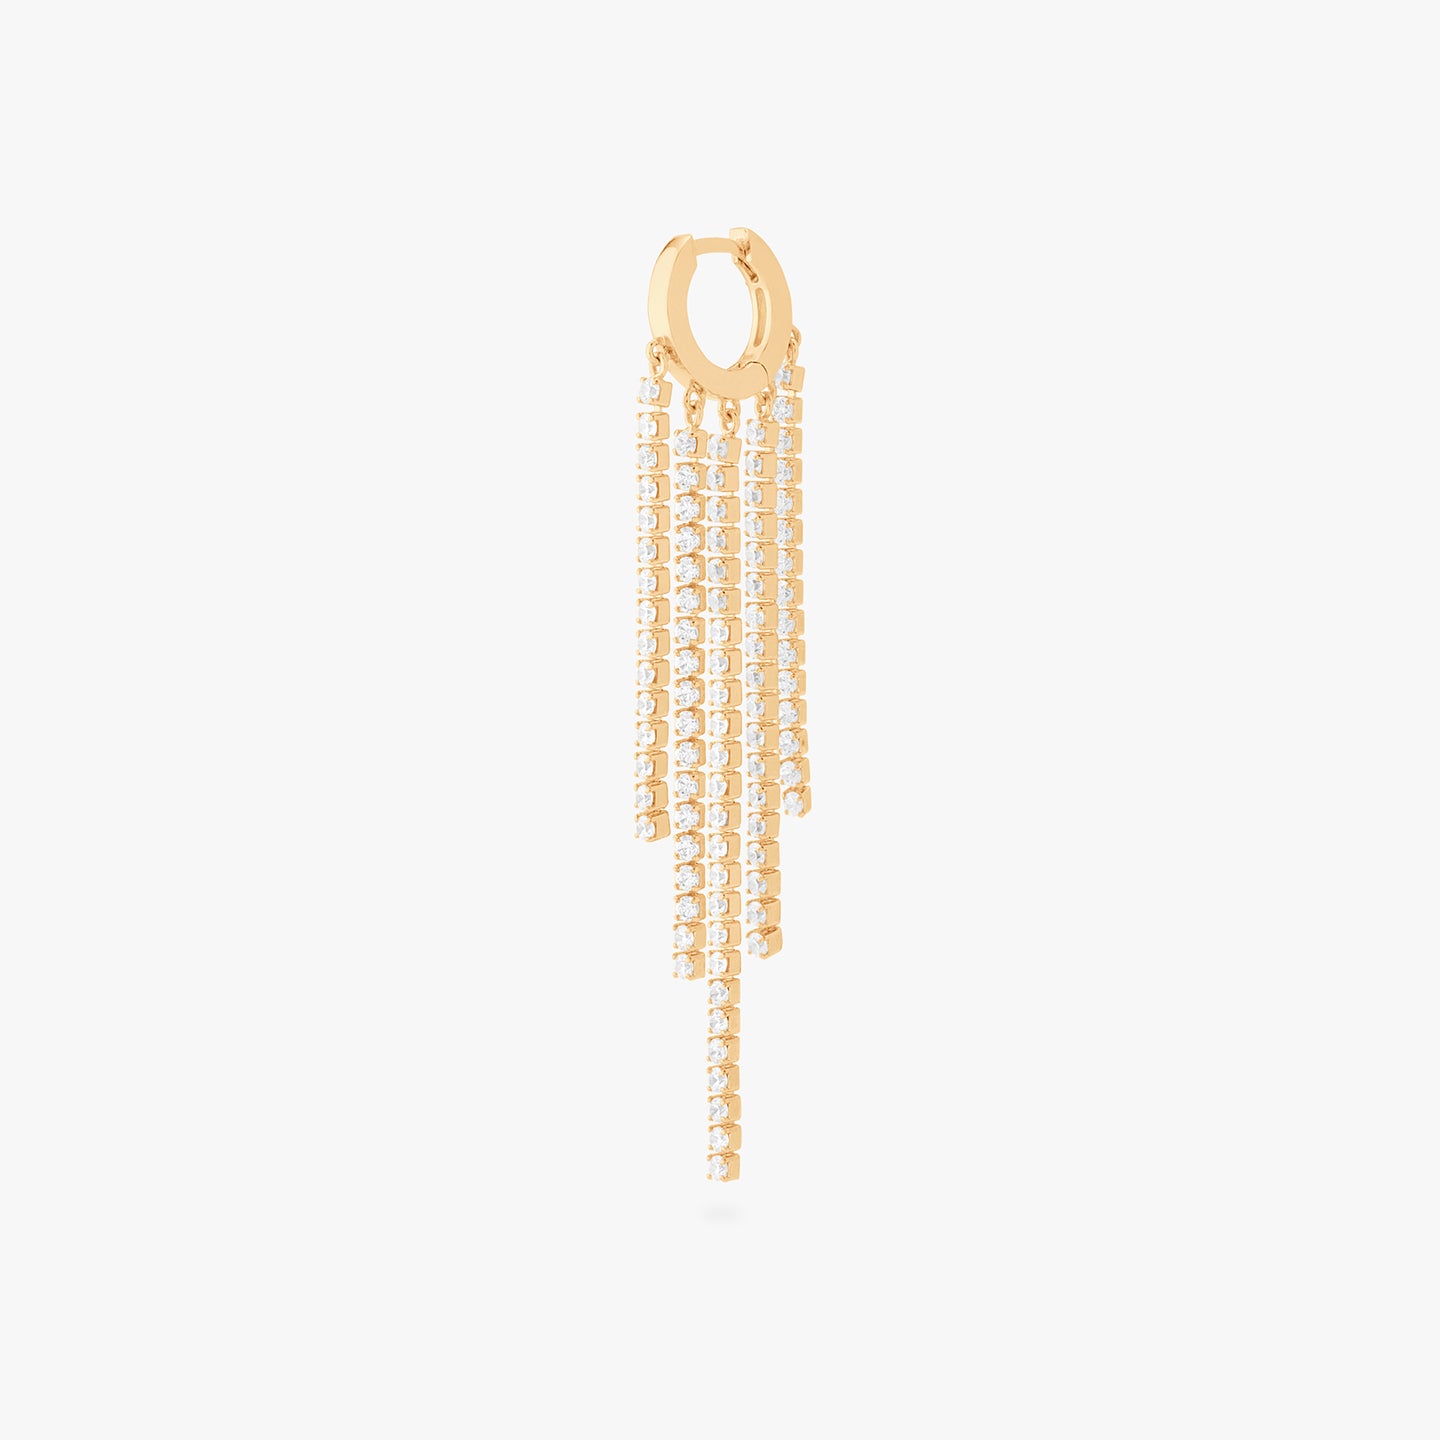 This is an image of a gold huggie that has gold/clear CZ strands dangling from it in a fringed pattern. color:null|gold/clear